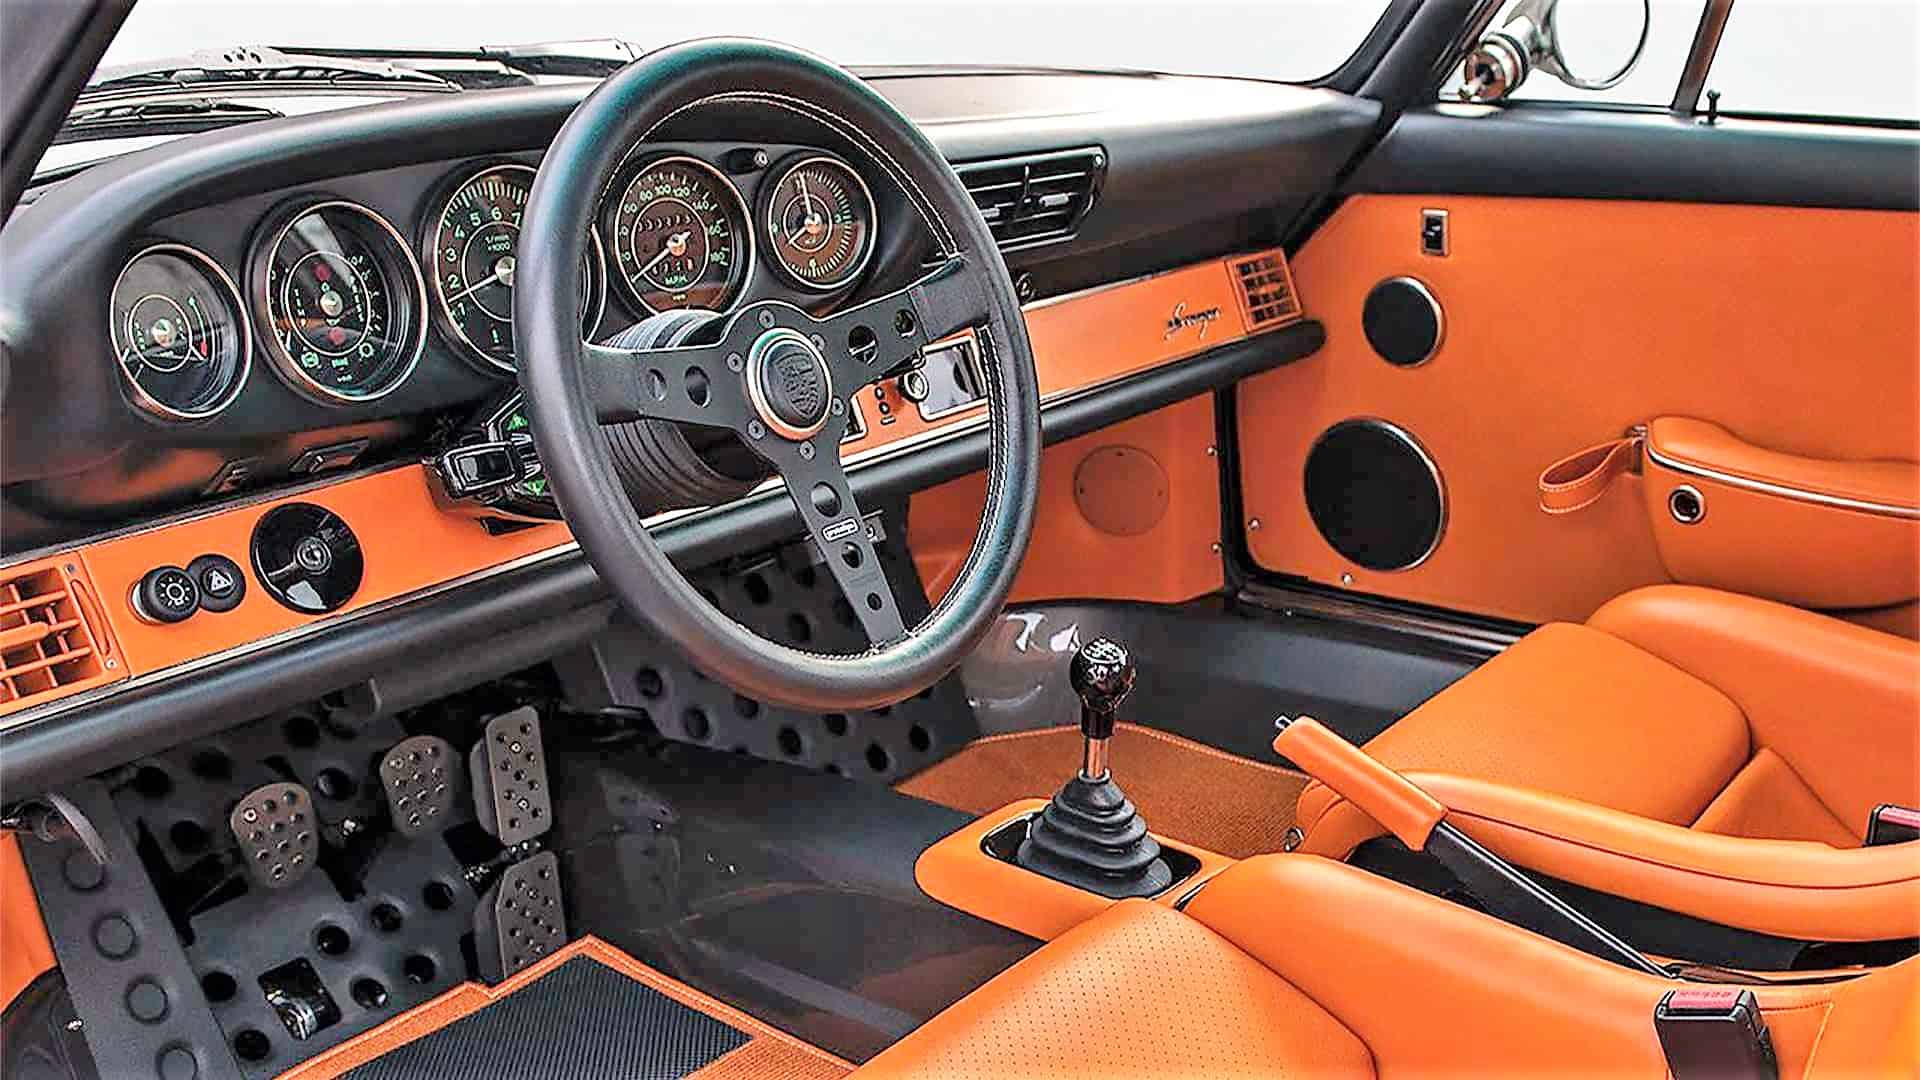 Porsche 911 Reimagined by Singer - the Dynamics and Lightweighting Study  Interior Layout & Technology | Top Gear